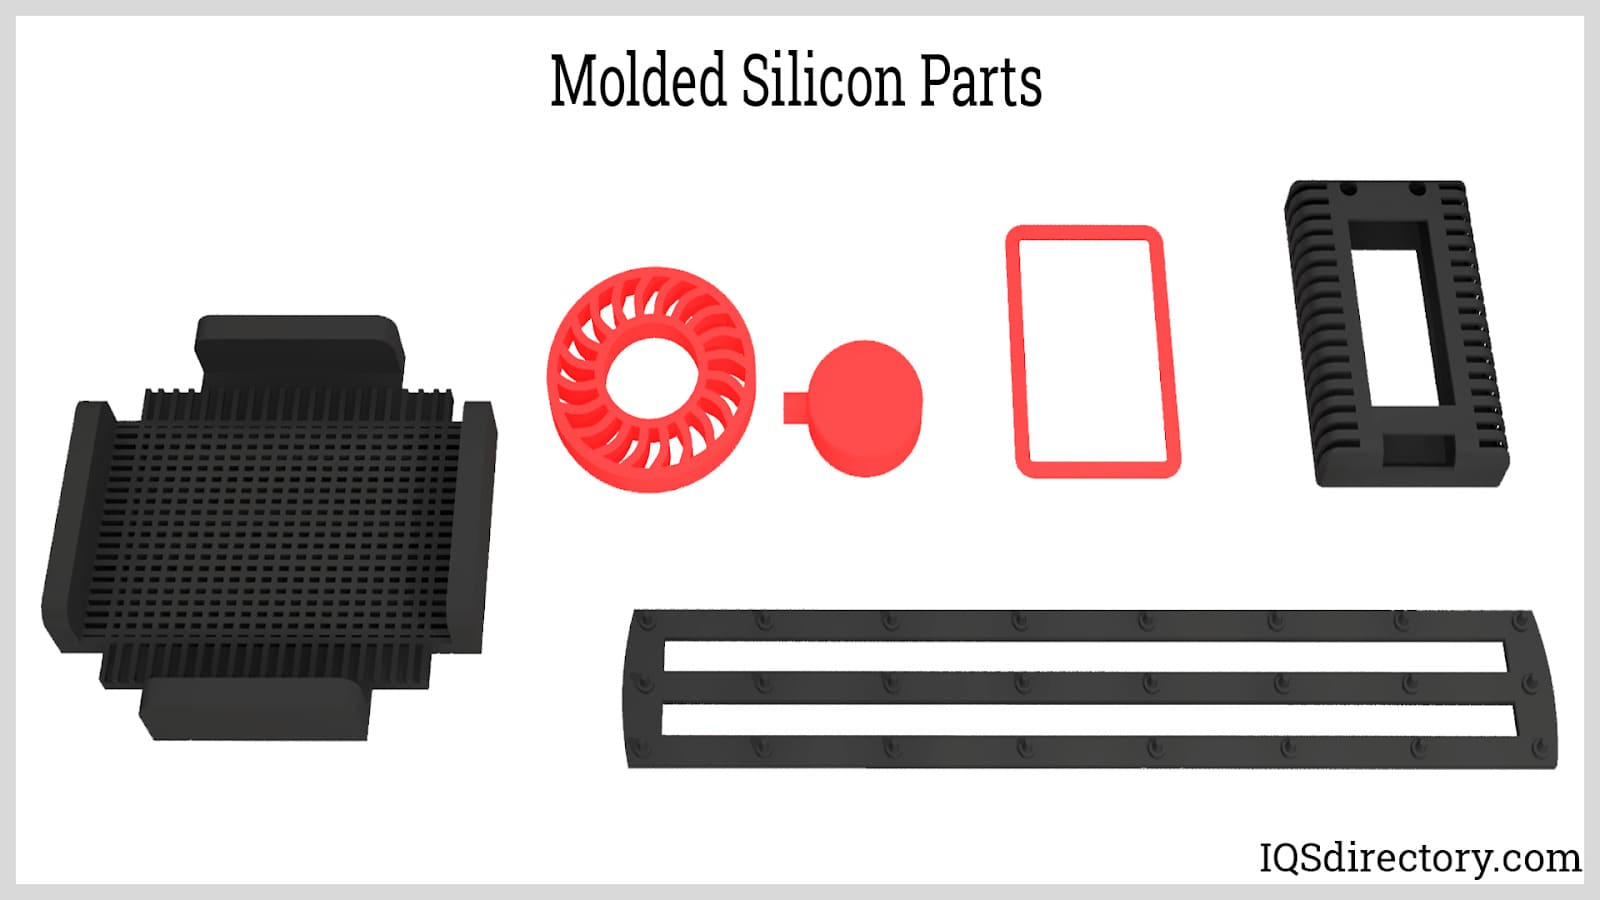 Molded Silicon Parts